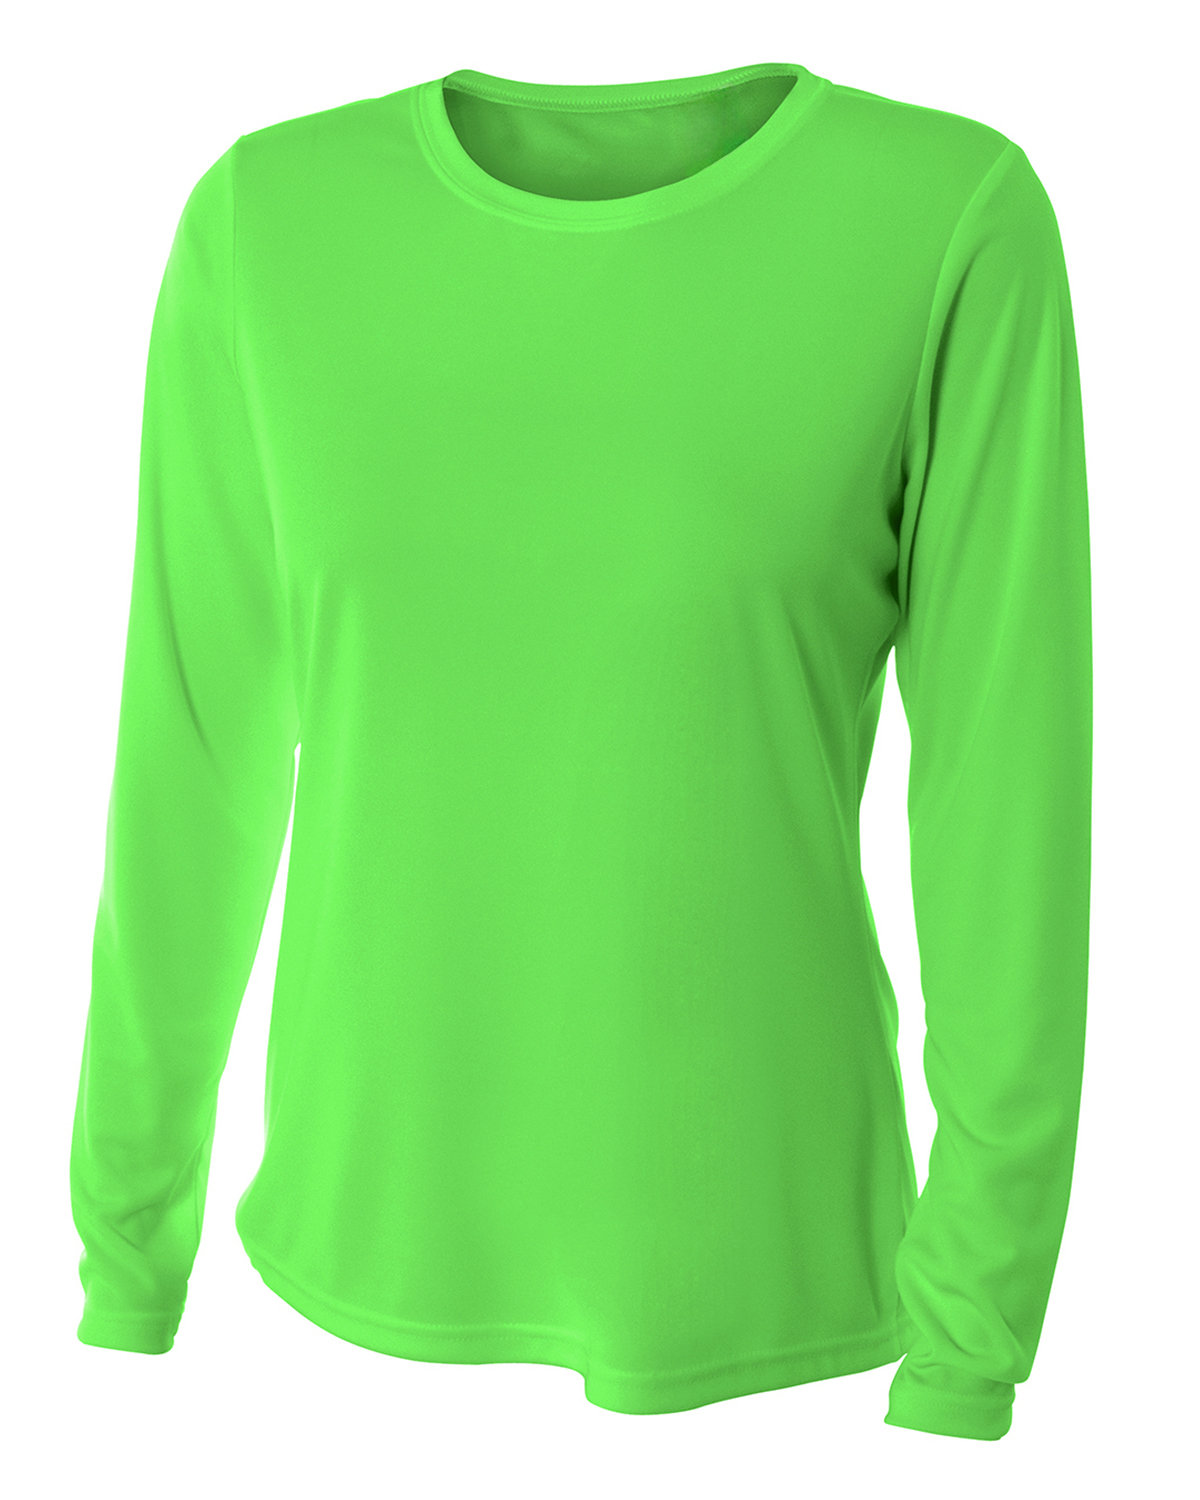 A4® NW3002 Women's Long Sleeve Cooling Performance Crew - One Stop